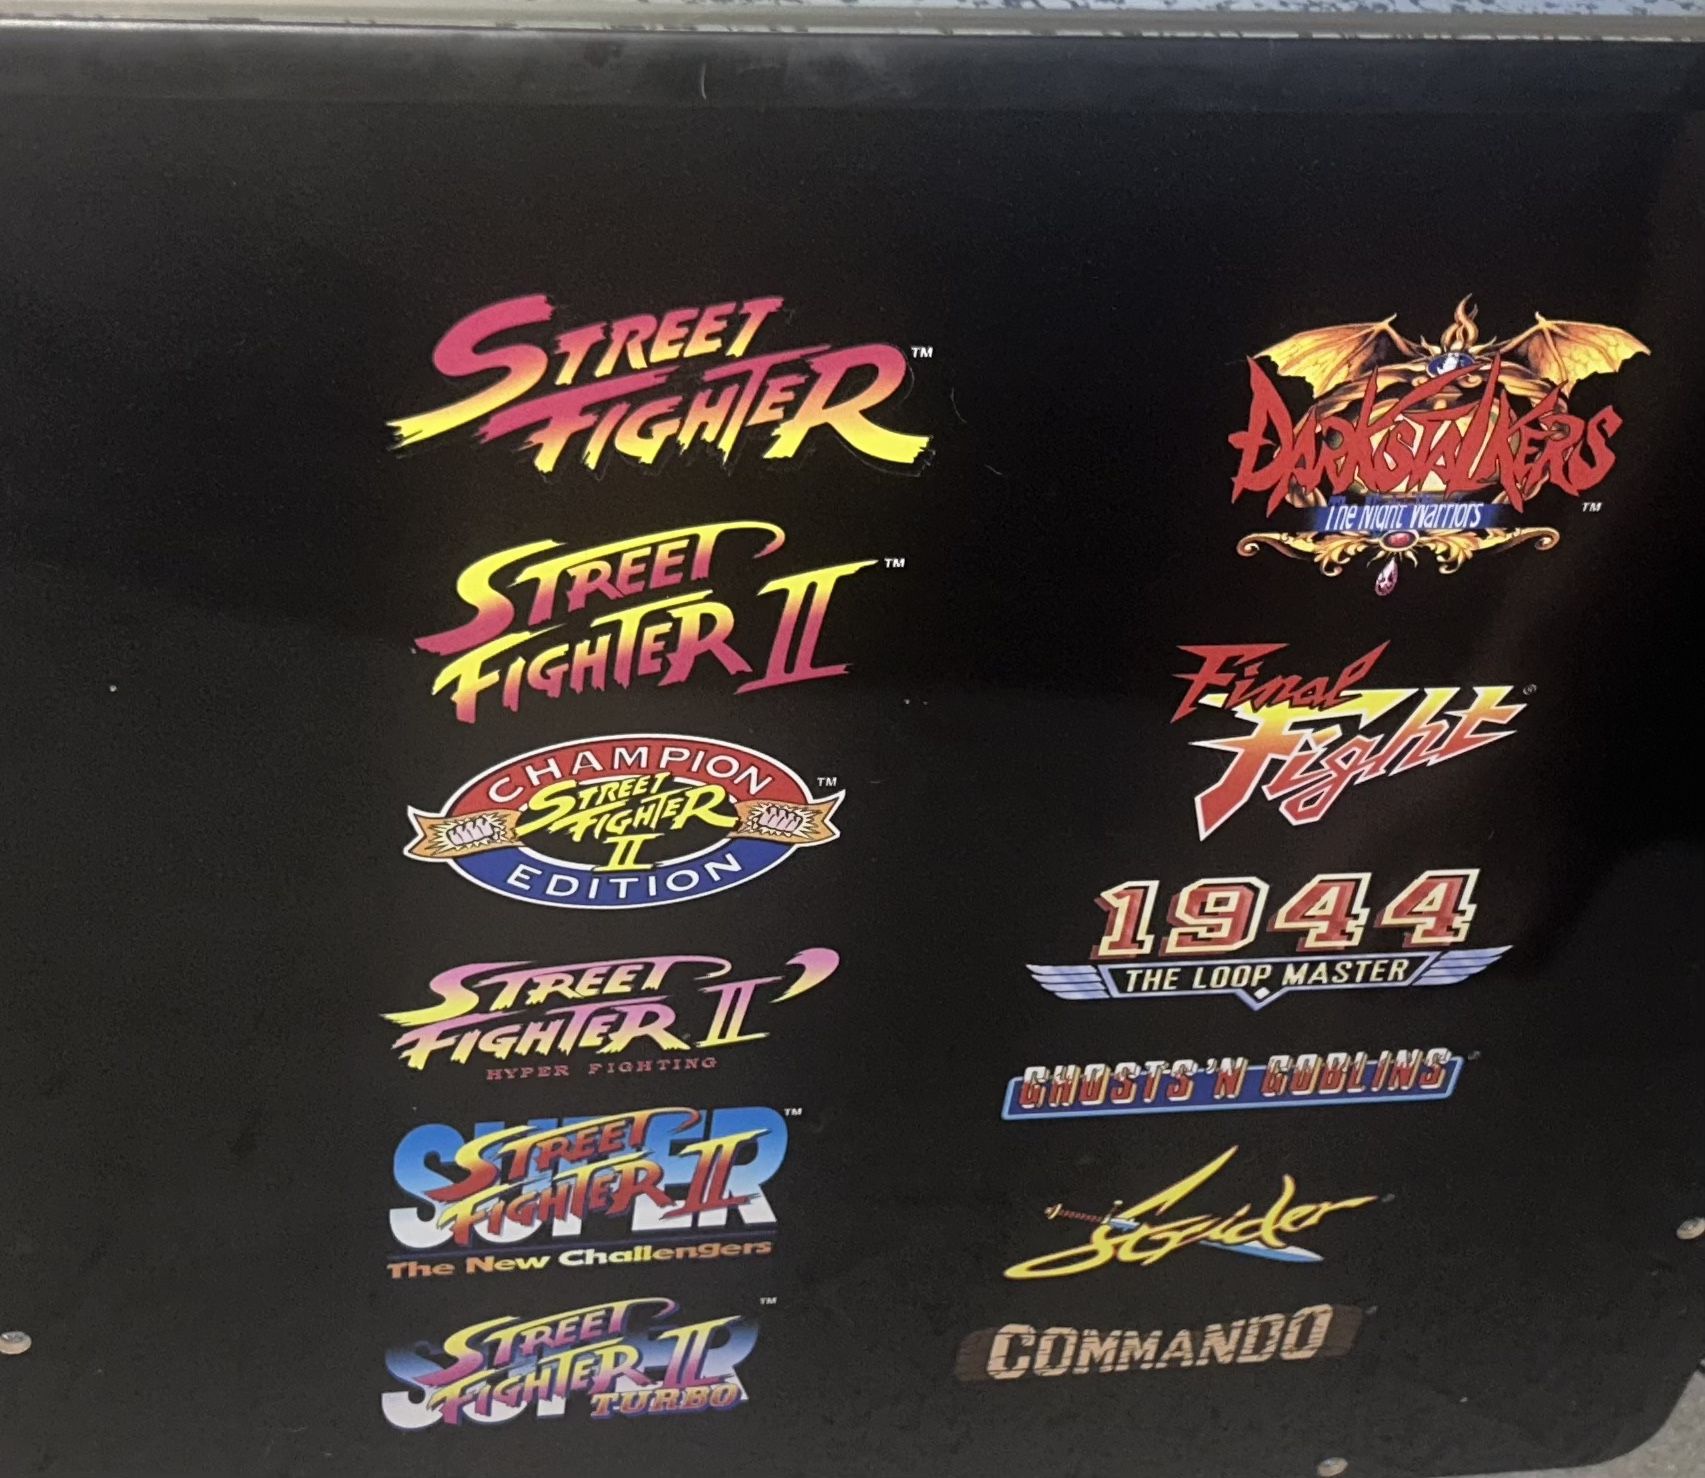 Arcade 1up Street Fighter Deluxe Cocktail Table Version 12 In One Games